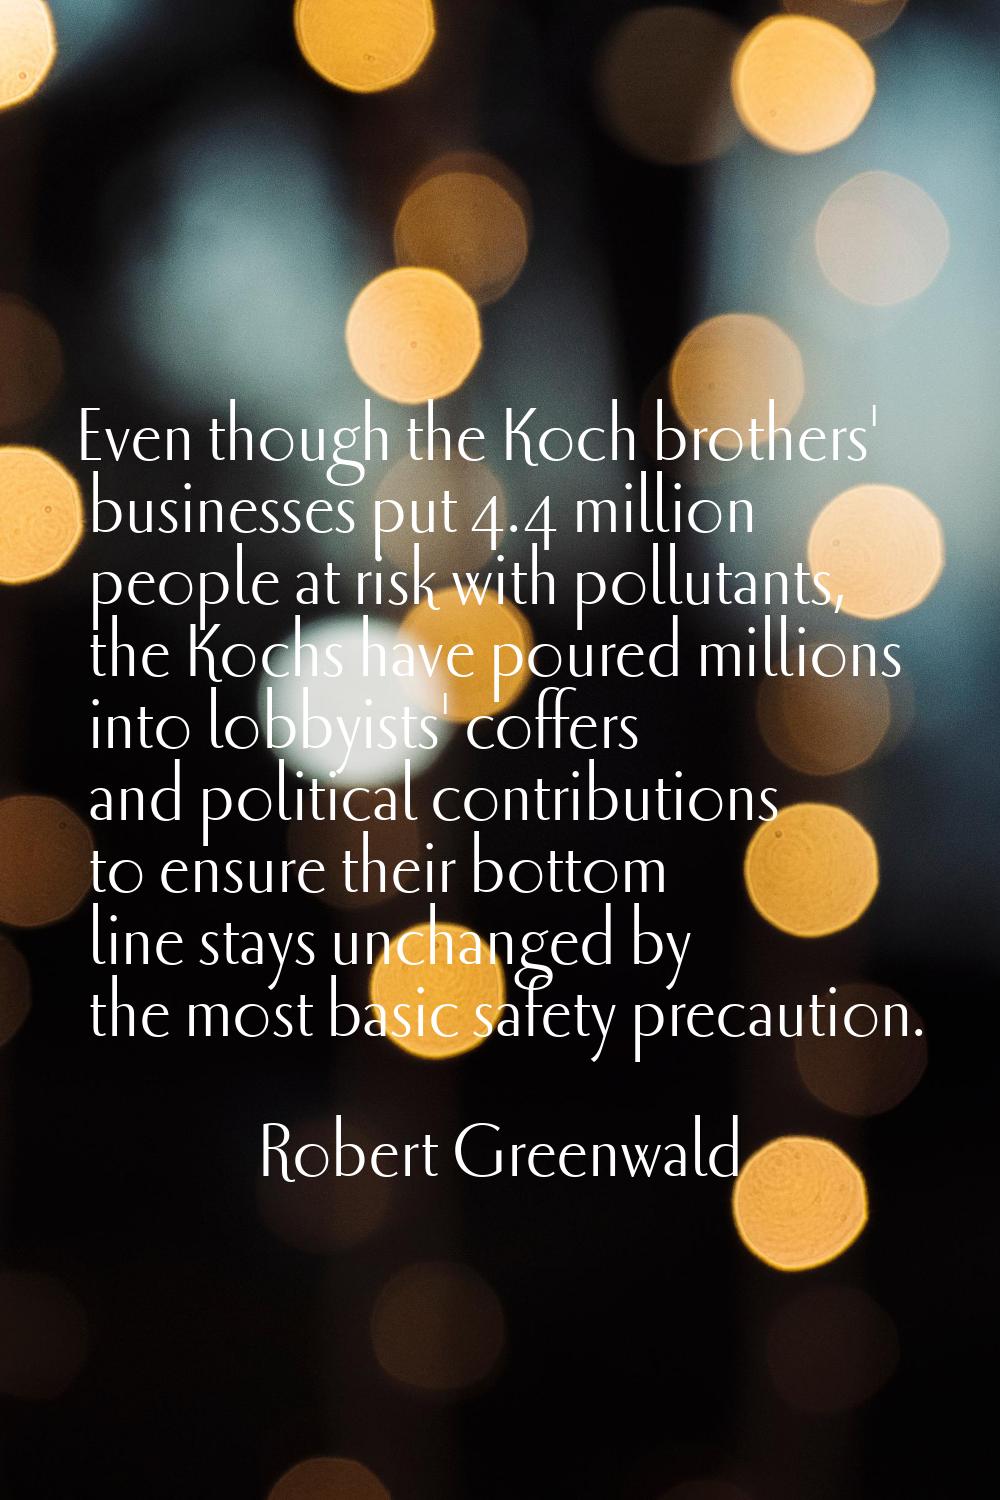 Even though the Koch brothers' businesses put 4.4 million people at risk with pollutants, the Kochs